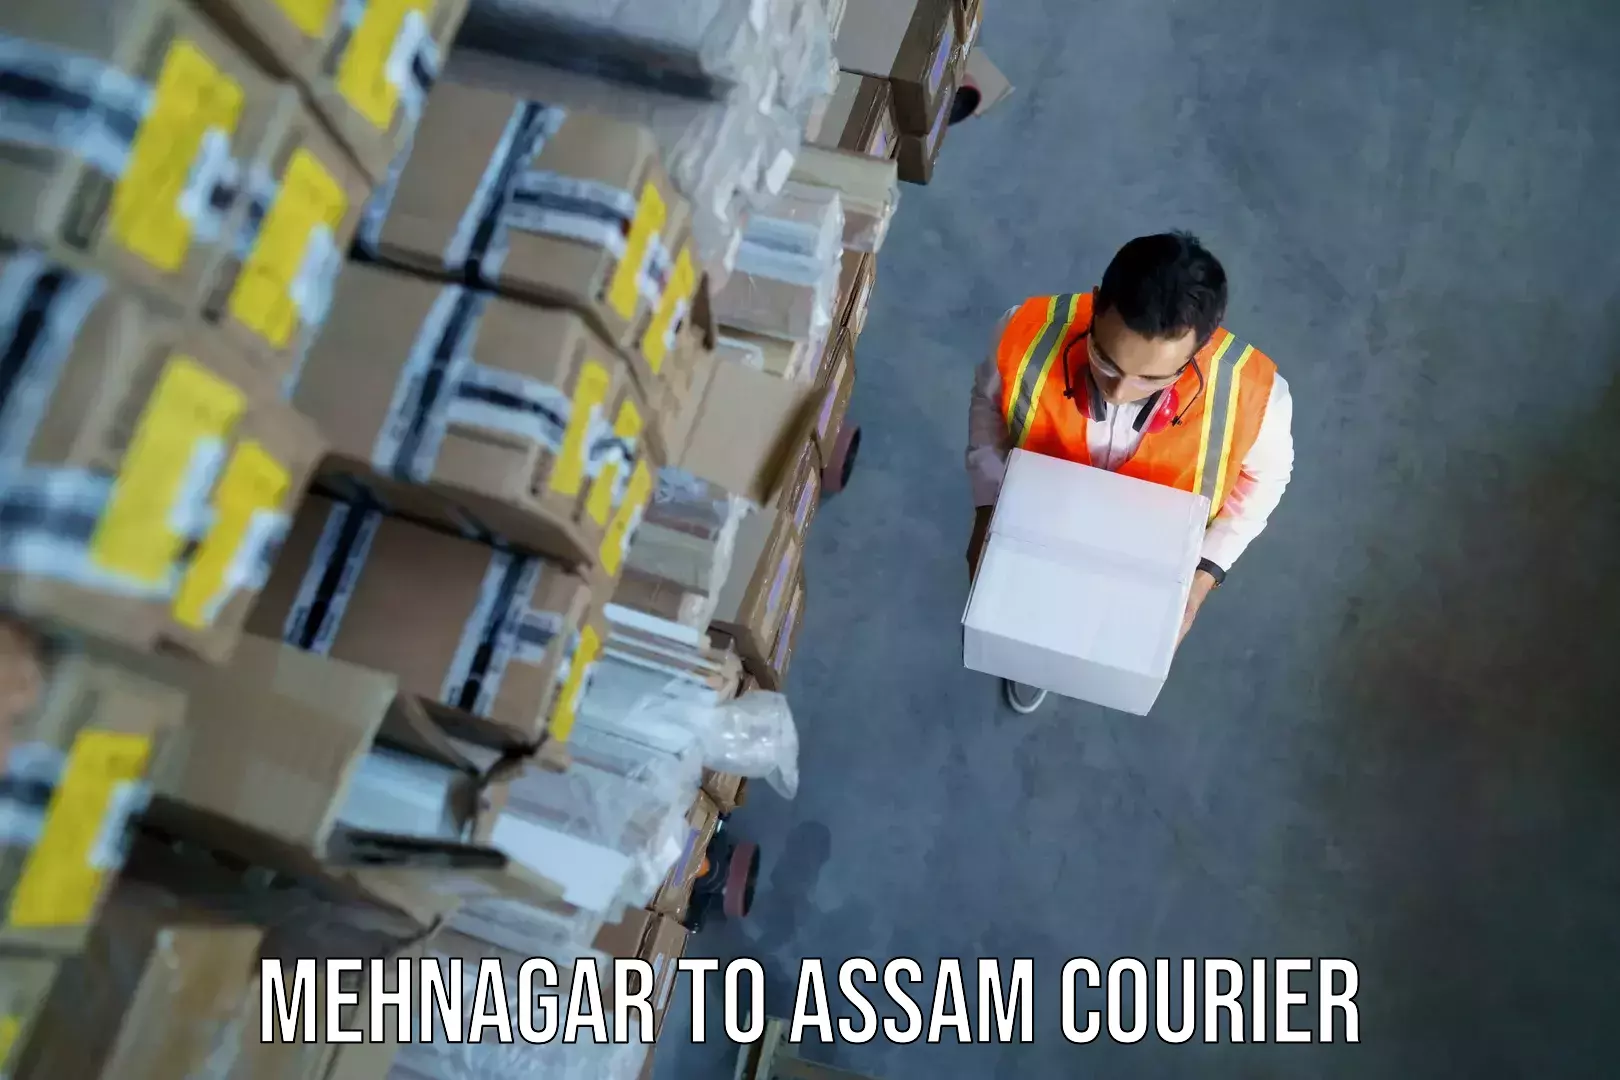 Instant baggage transport quote Mehnagar to Demow